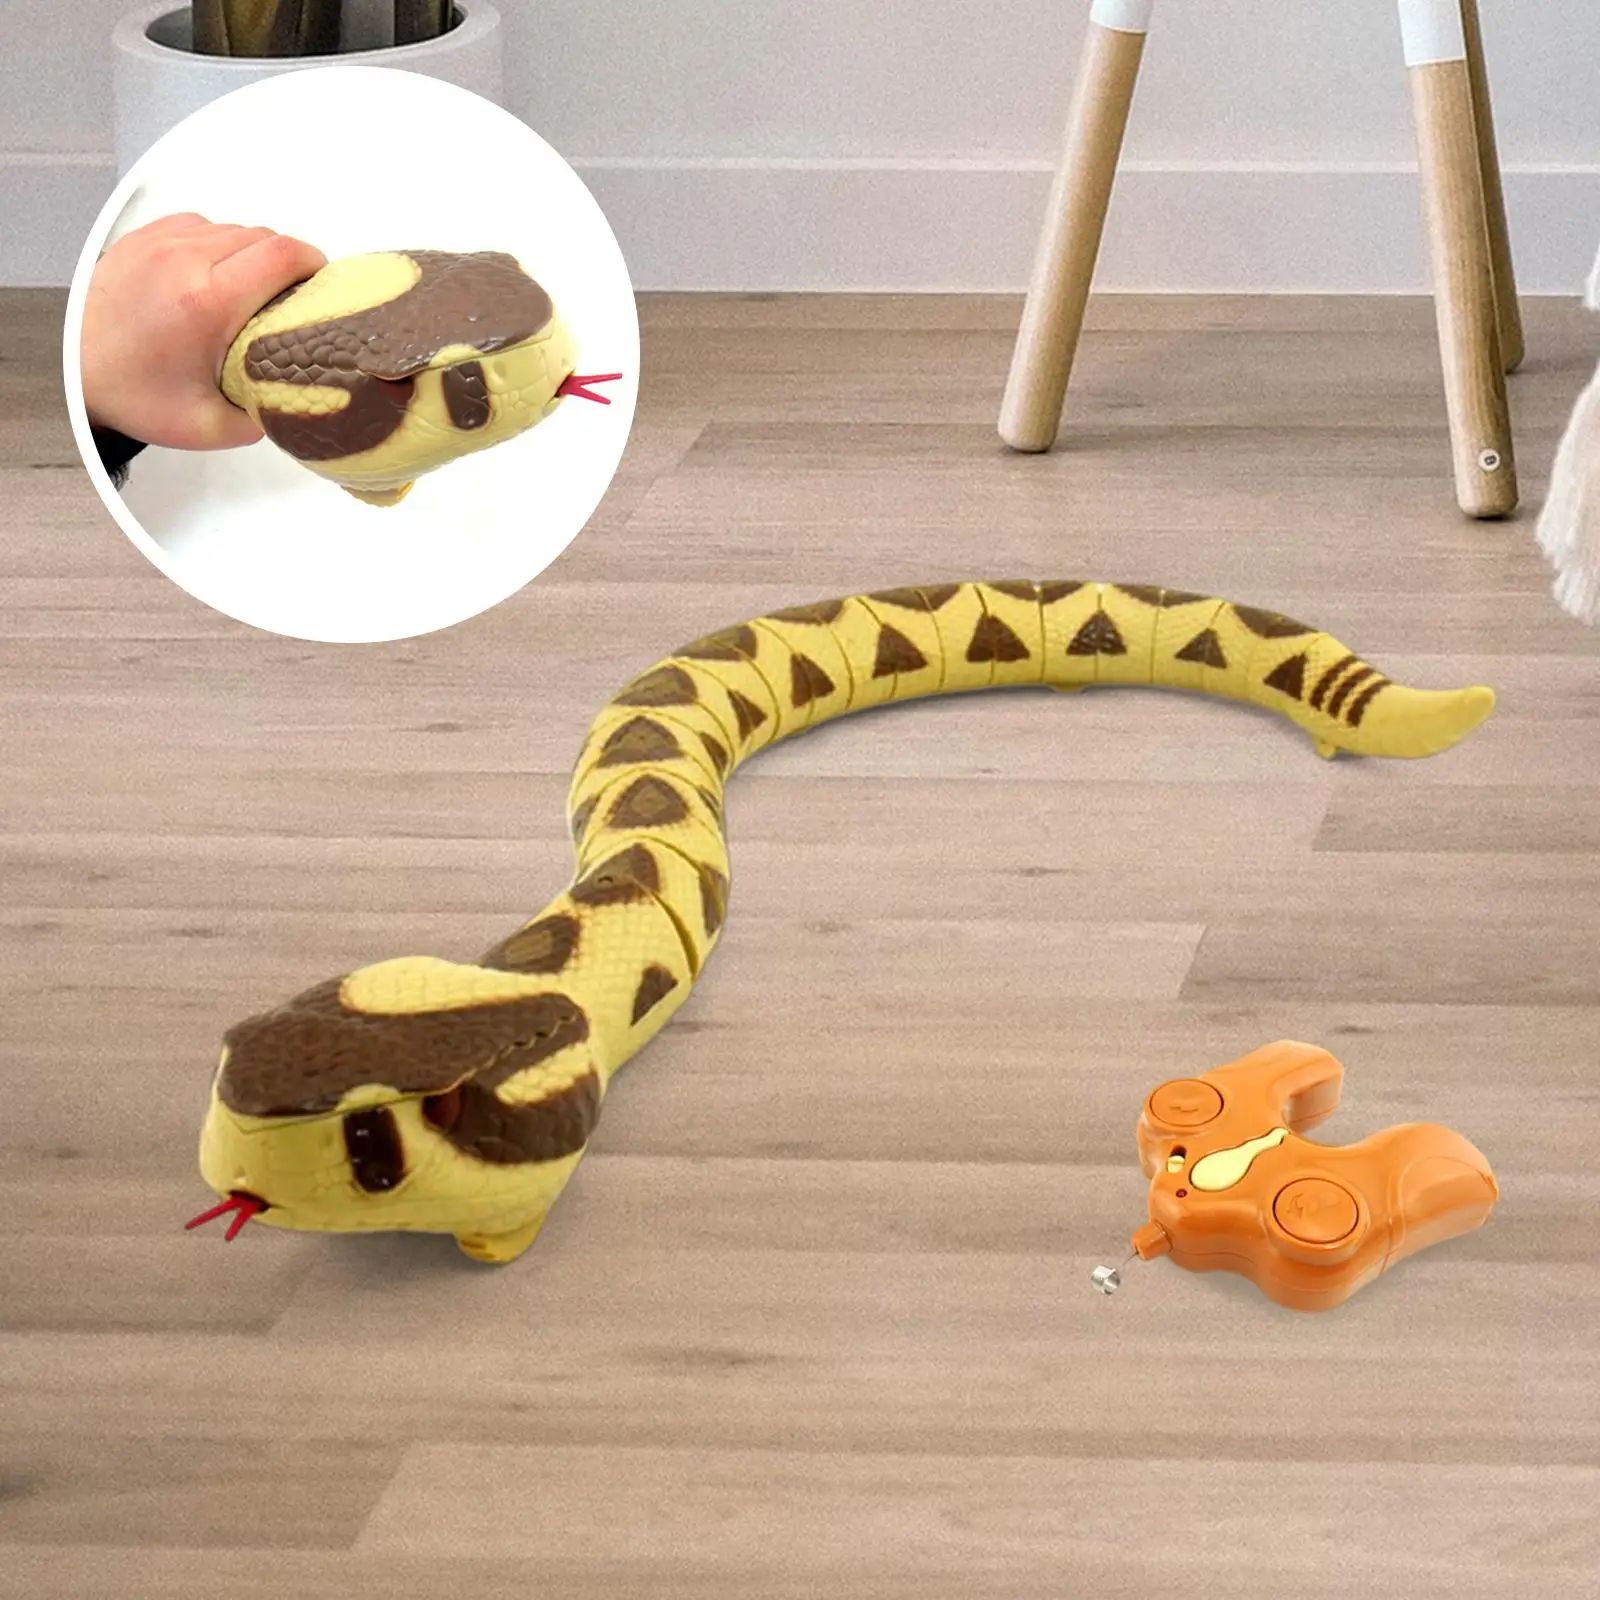 Simulation RC Snake Toys Artifical Snake Model Scary Snake Toy Halloween Tricks Toy for Party Tabletop Decors Jokes